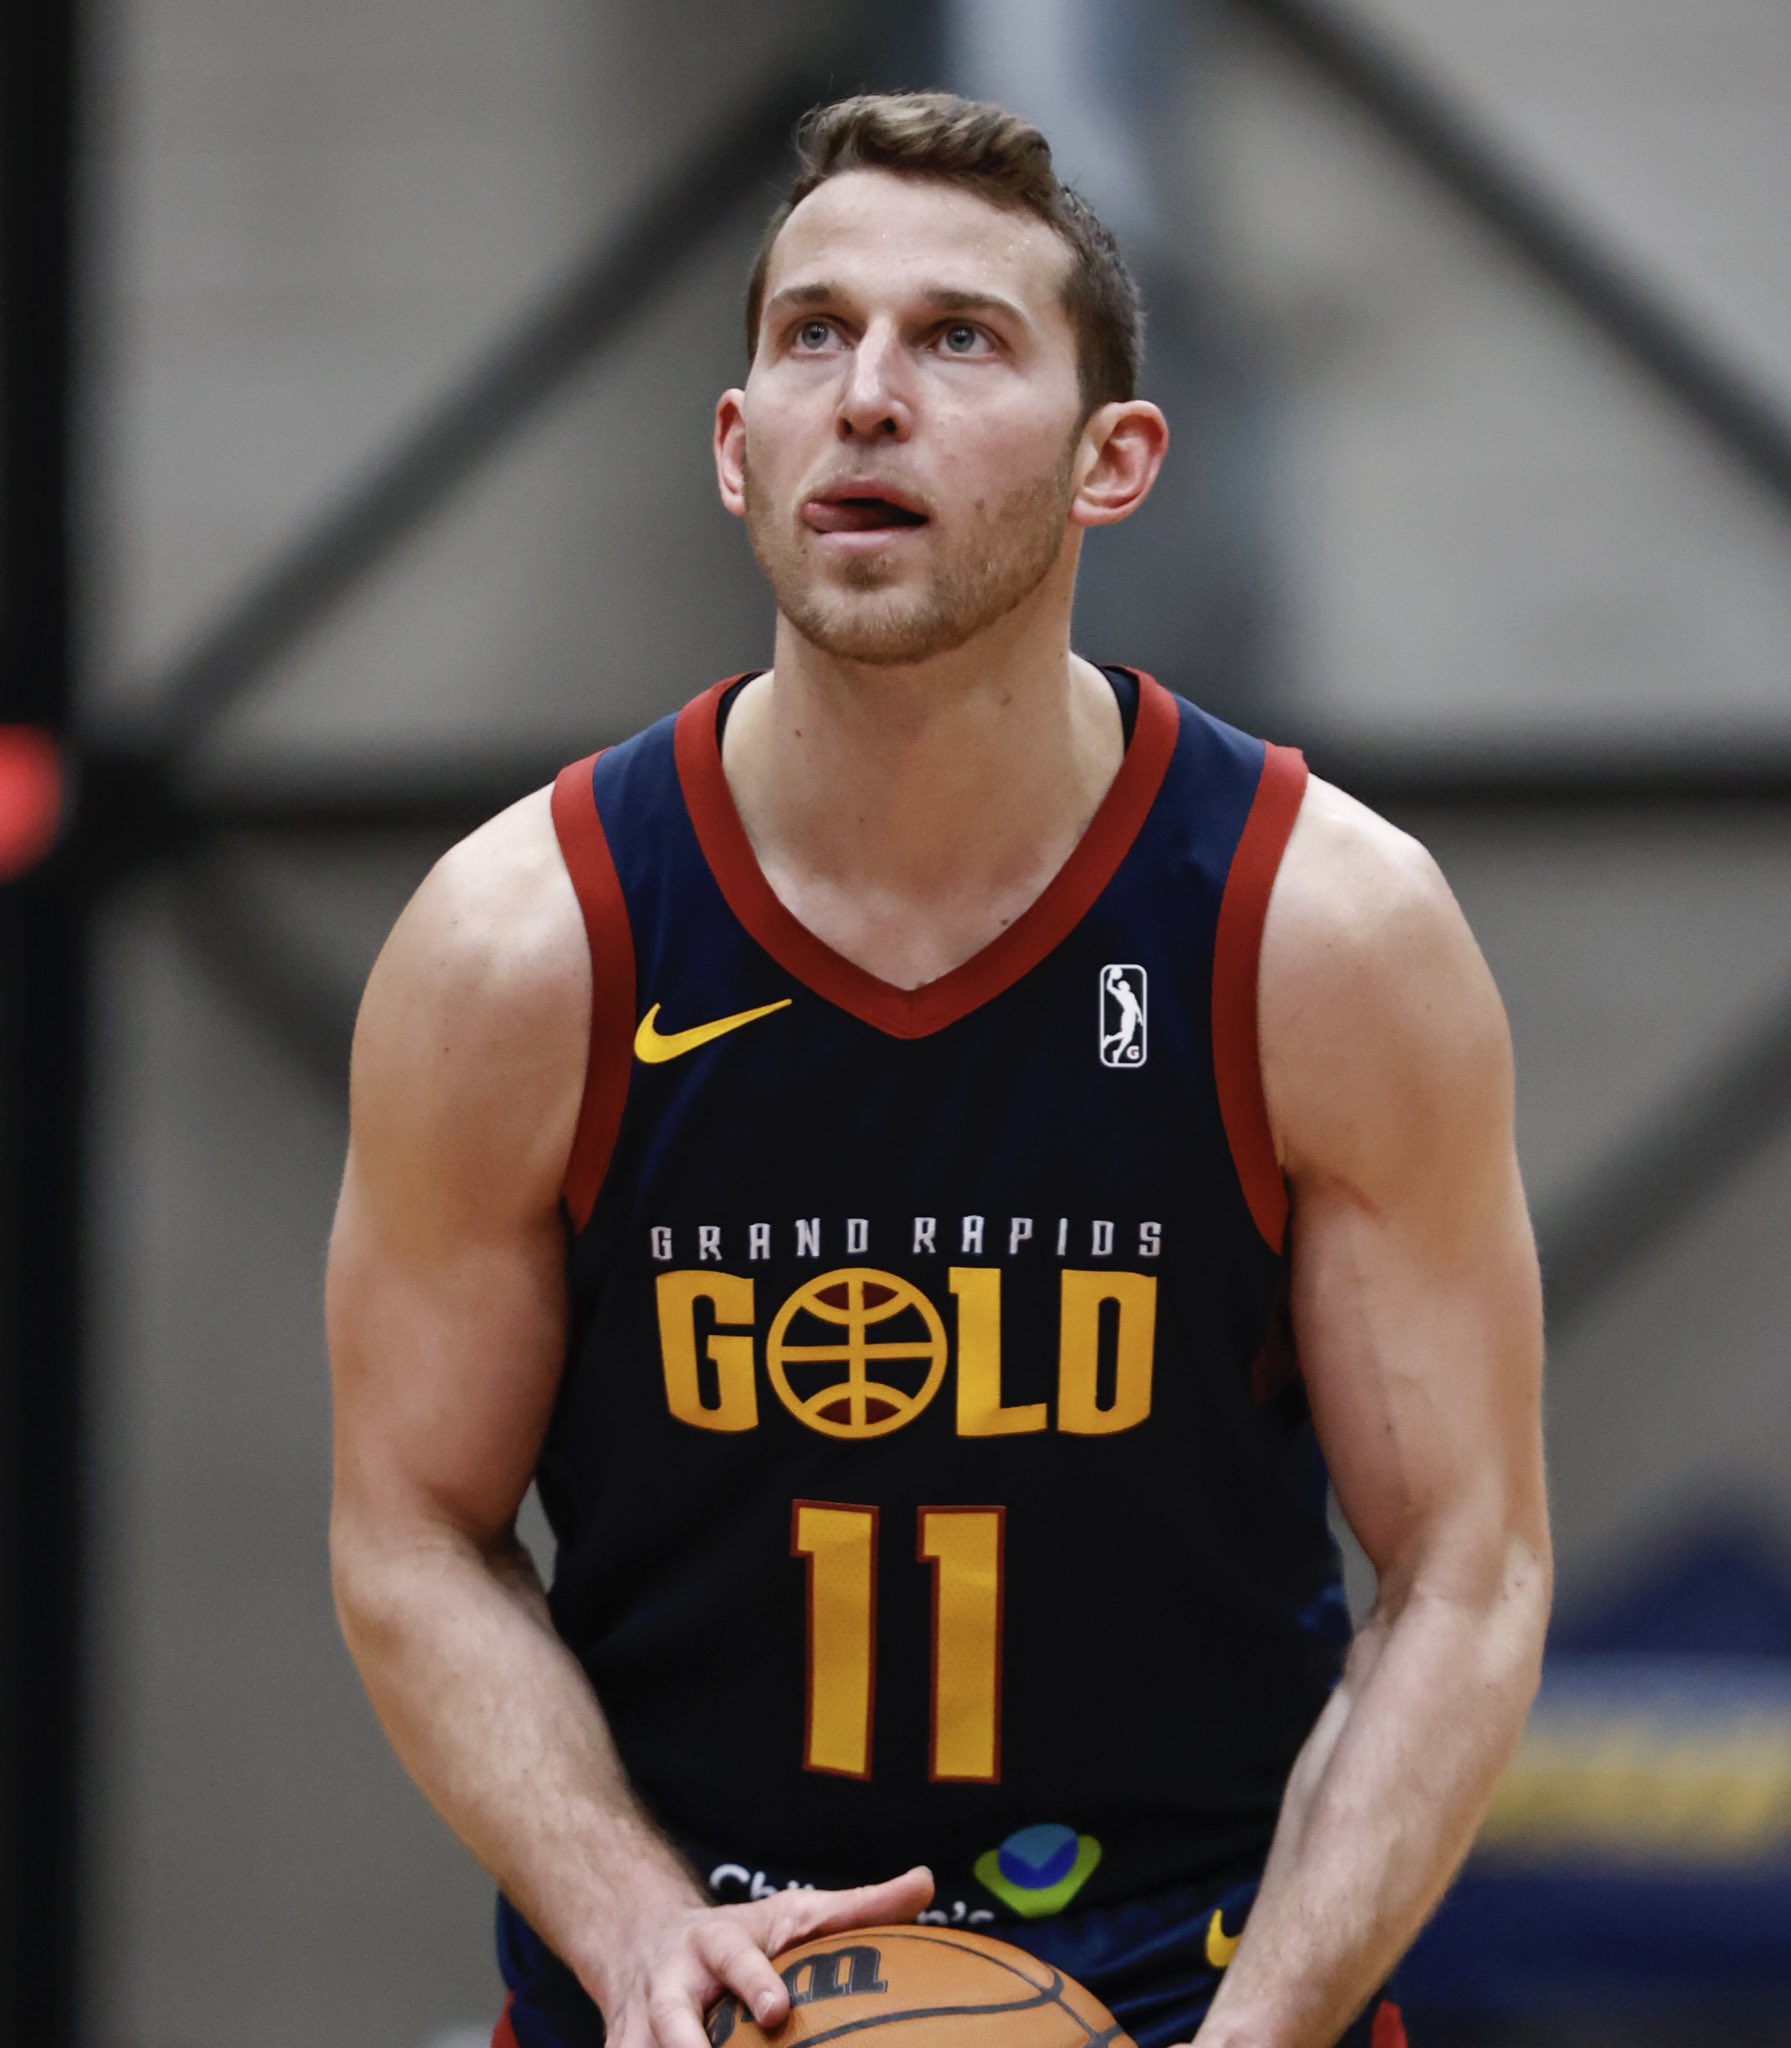 NBA G League on "THIS IS MADNESS! NIK STAUSKAS CANNOT MISS! 🔥🔥🔥🔥🔥 34 PTS - 11/11 FG - 7/7 3PT IN 13 MINUTES………….. https://t.co/usmw6kqPOR" / Twitter